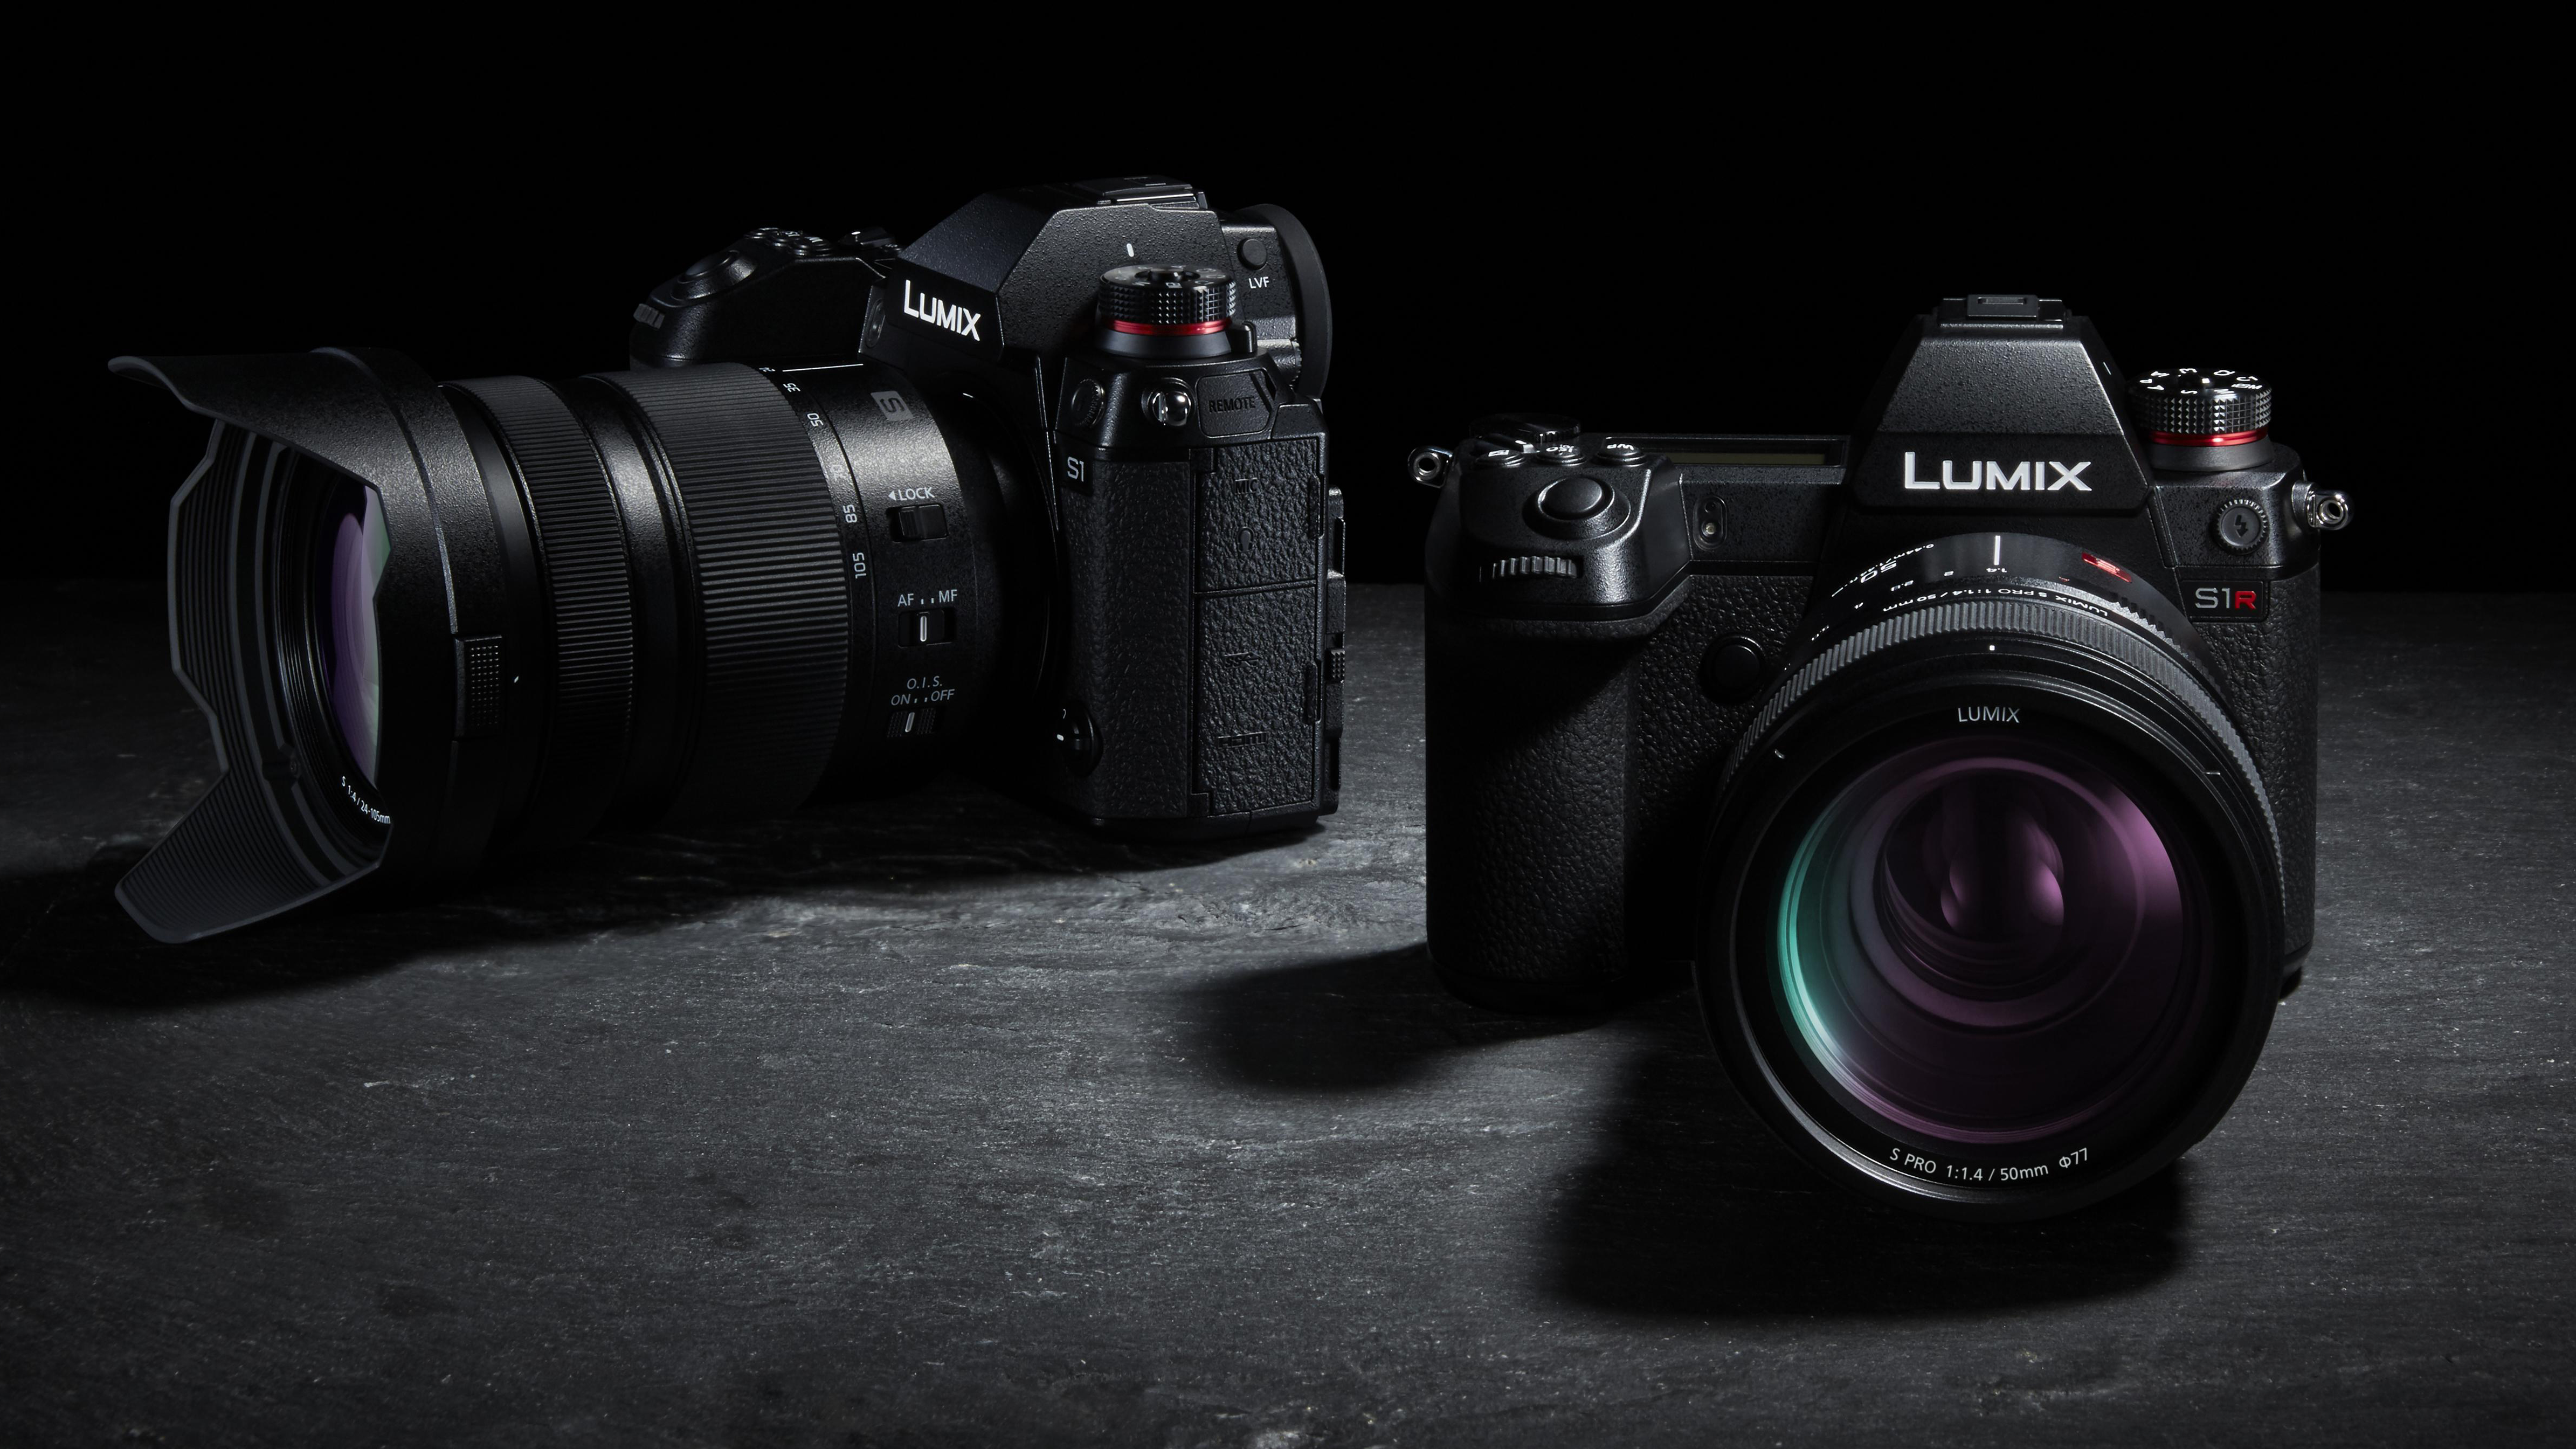 The Panasonic S5 is Officially Announced. What Are Your Thoughts?